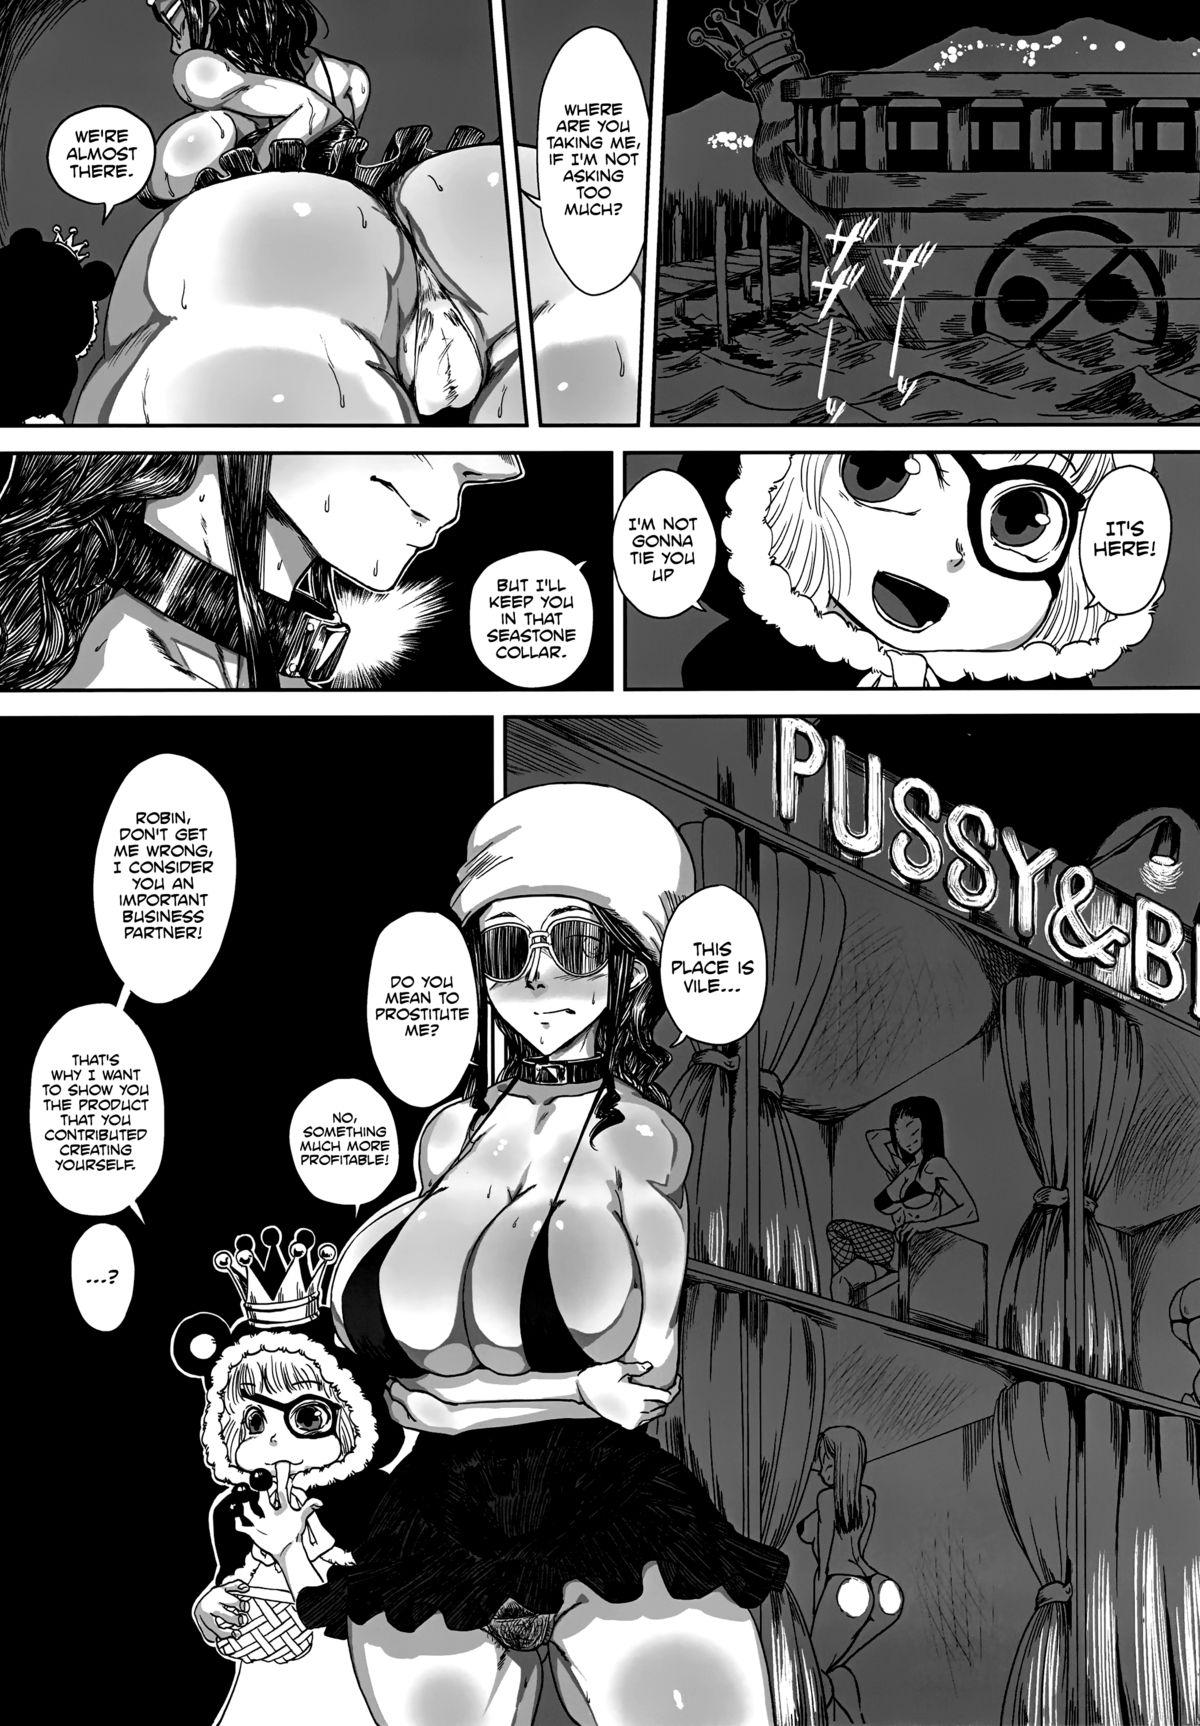 Fuck Pussy Robi Ana - One piece Amateur Sex - Page 7